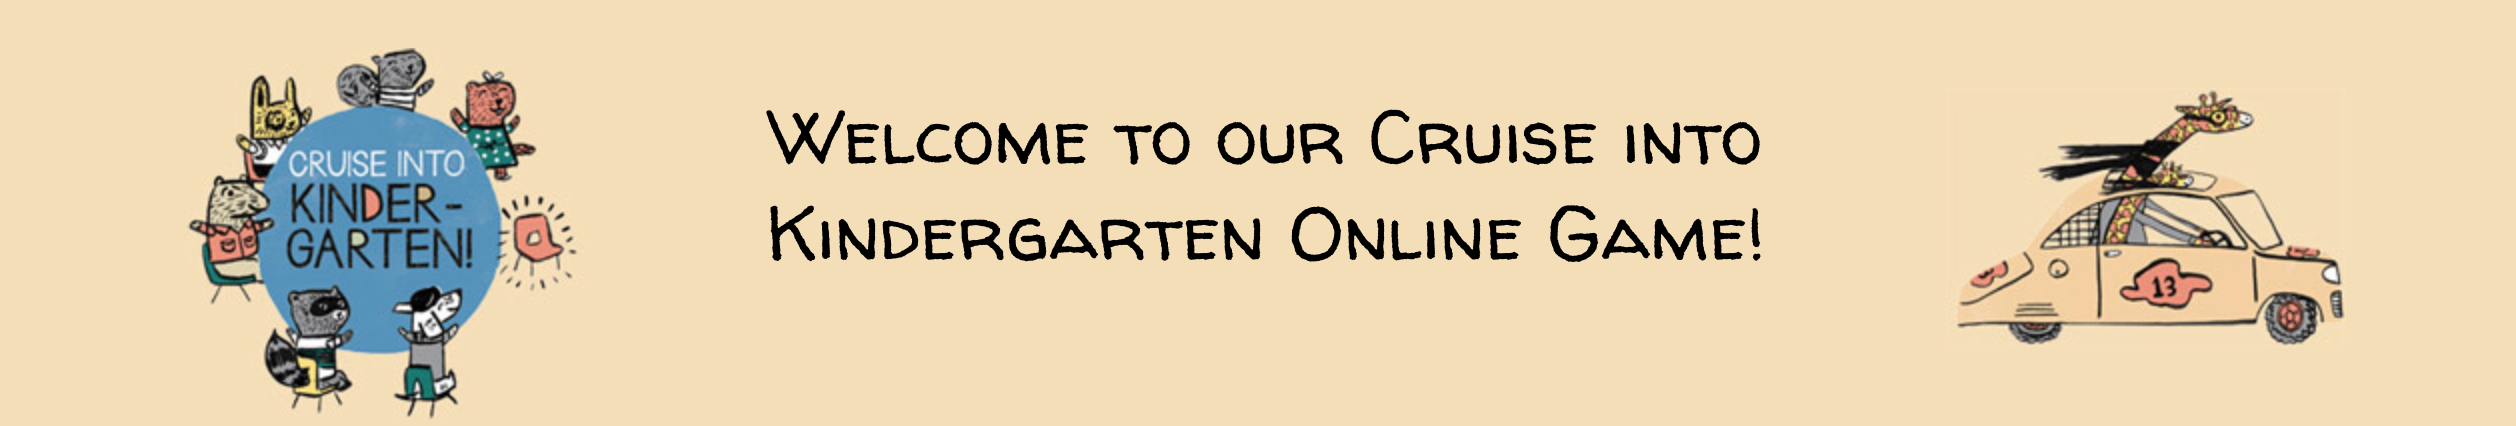 Welcome to our cruise into Kindergarten Online Game Logo